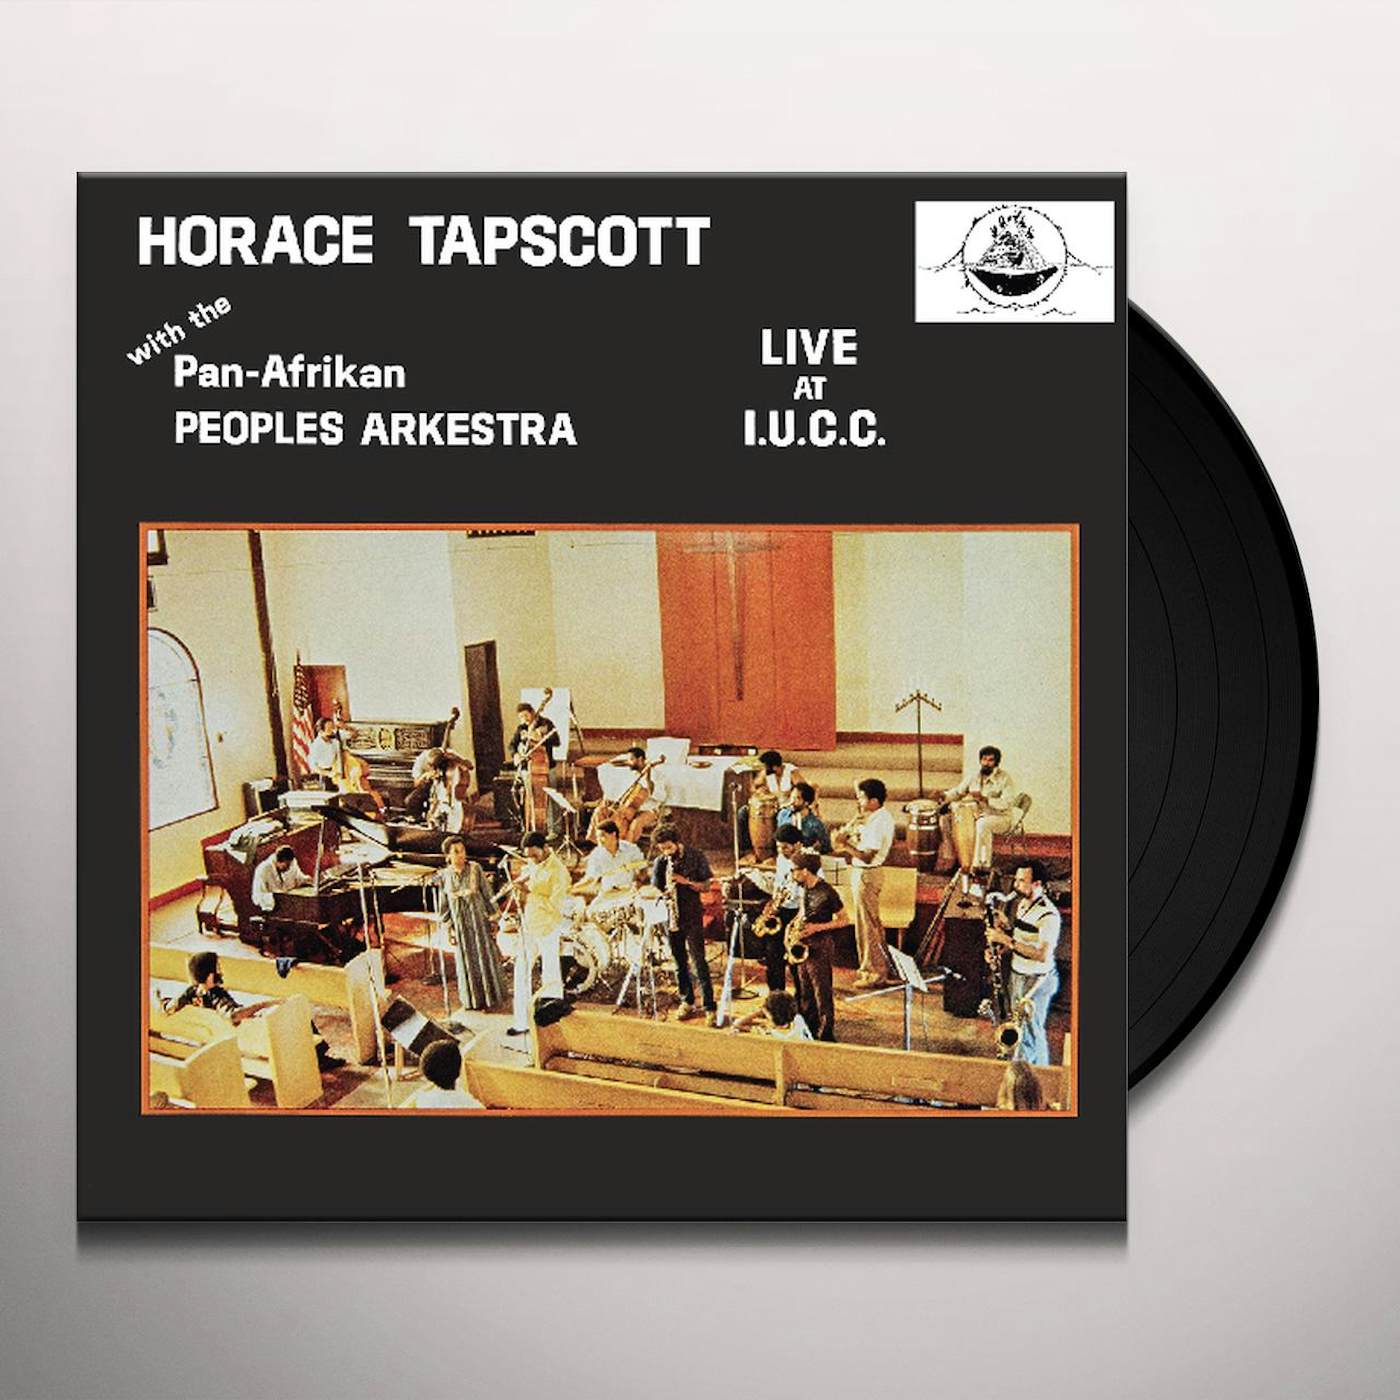 Horace Tapscott with The Pan-Afrikan Peoples Arkestra Live At I.U.C.C. Vinyl Record